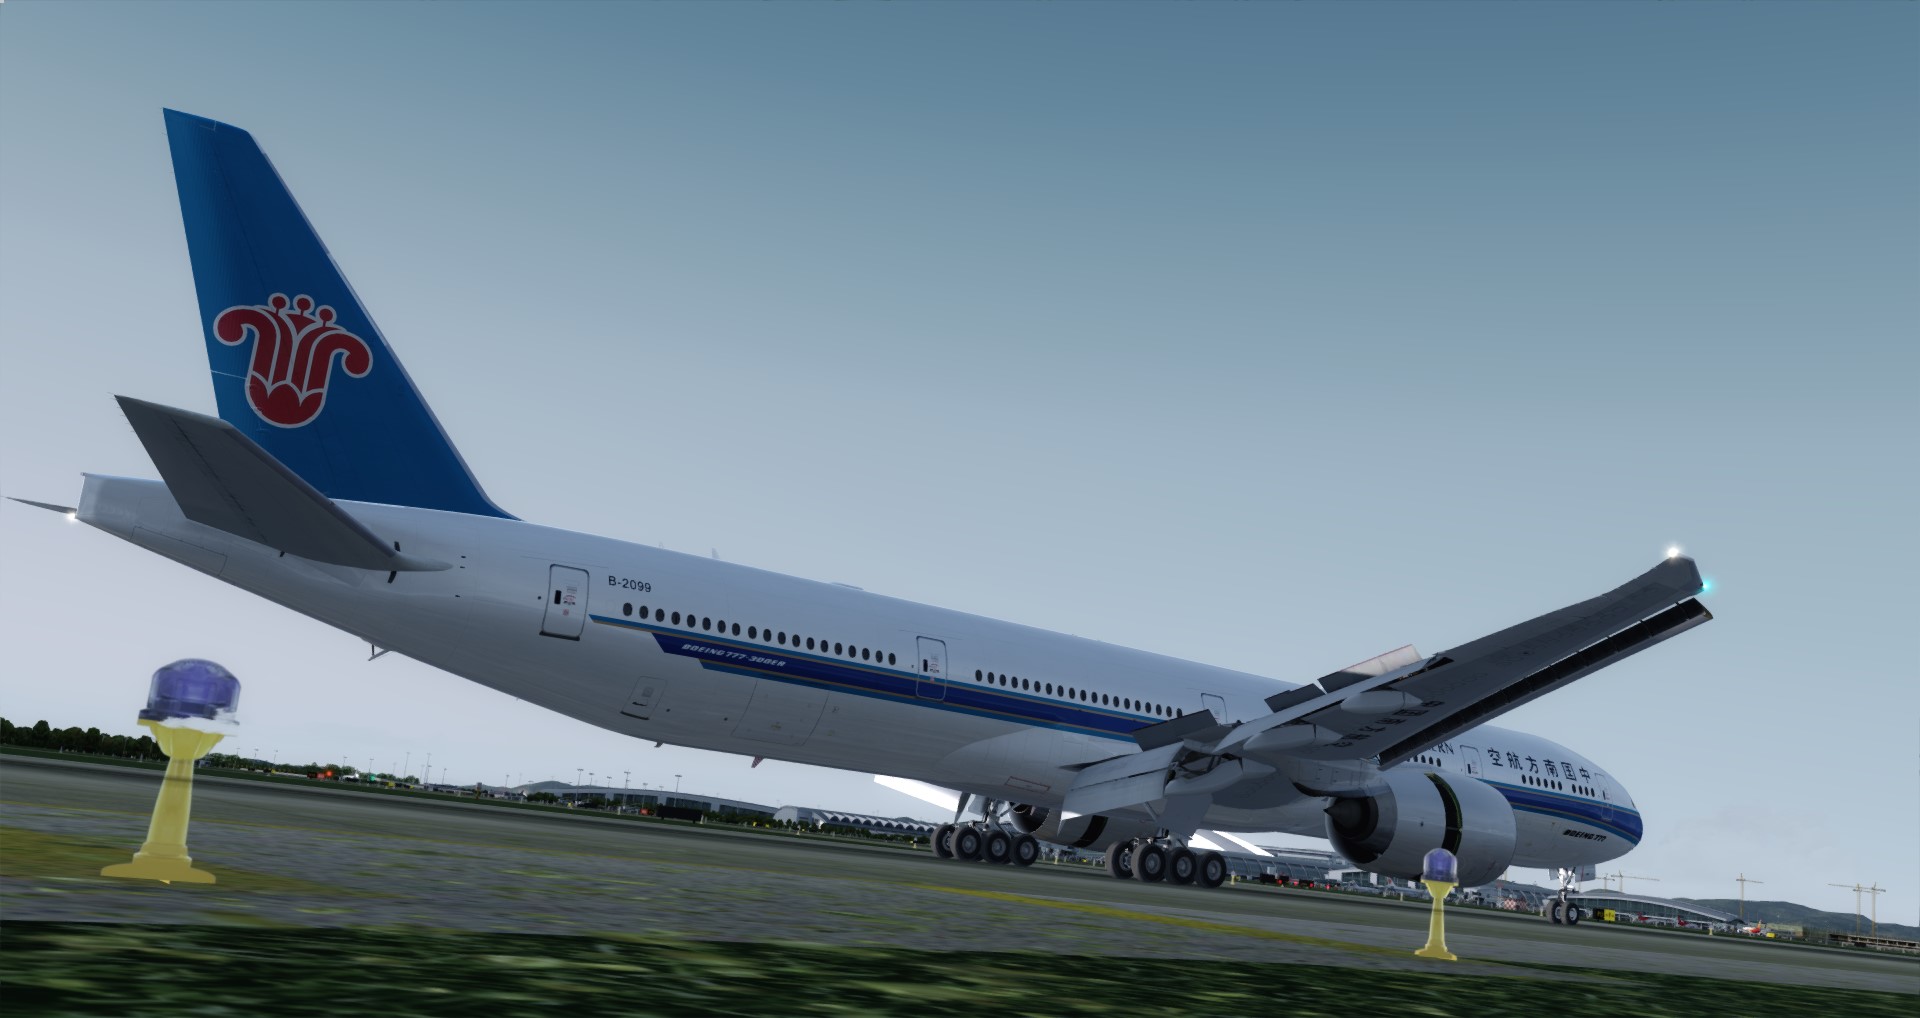 P3D V4 77W China Southern Airlines WADD-ZGGG 营救同胞-1598 